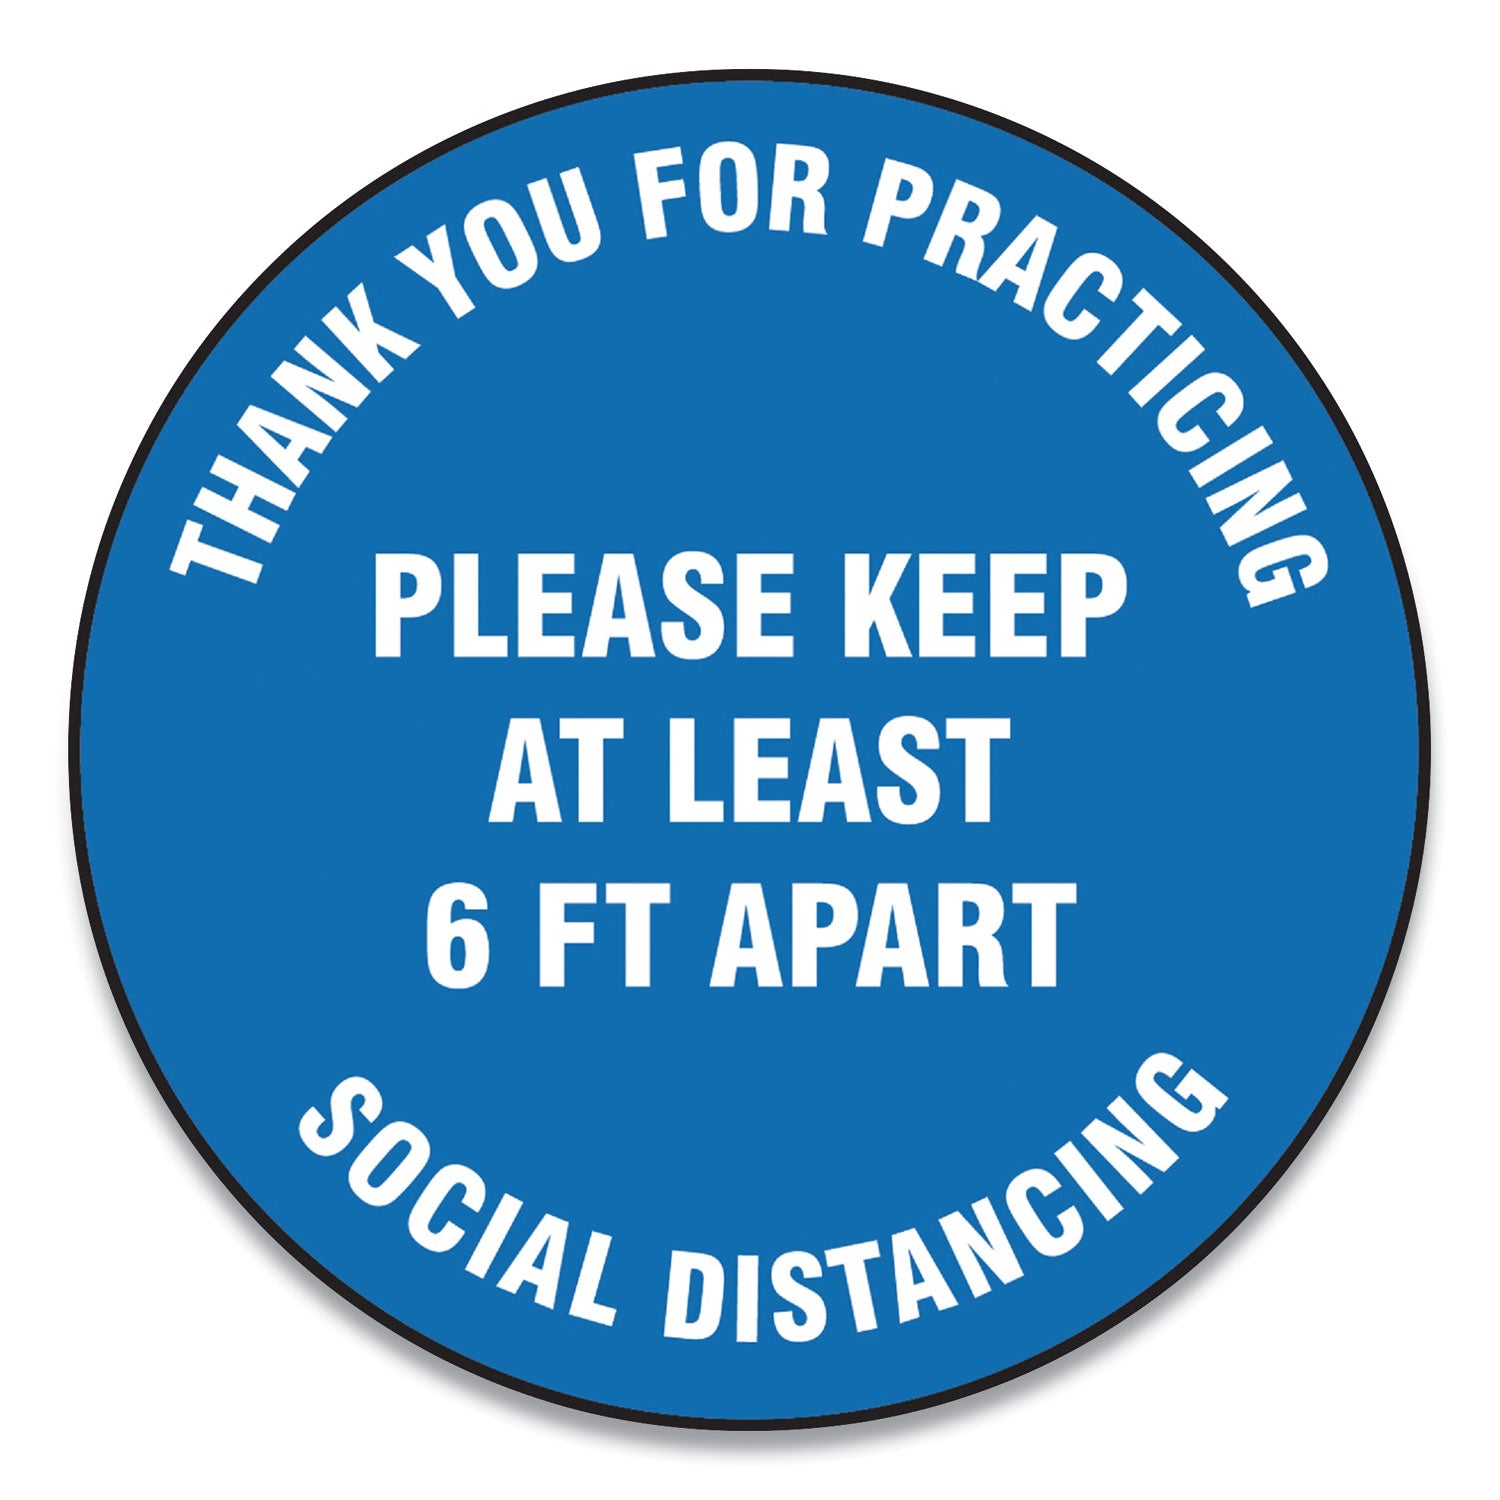 slip-gard-floor-signs-12-circle-thank-you-for-practicing-social-distancing-please-keep-at-least-6-ft-apart-blue-25-pk_gn1mfs420esp - 1